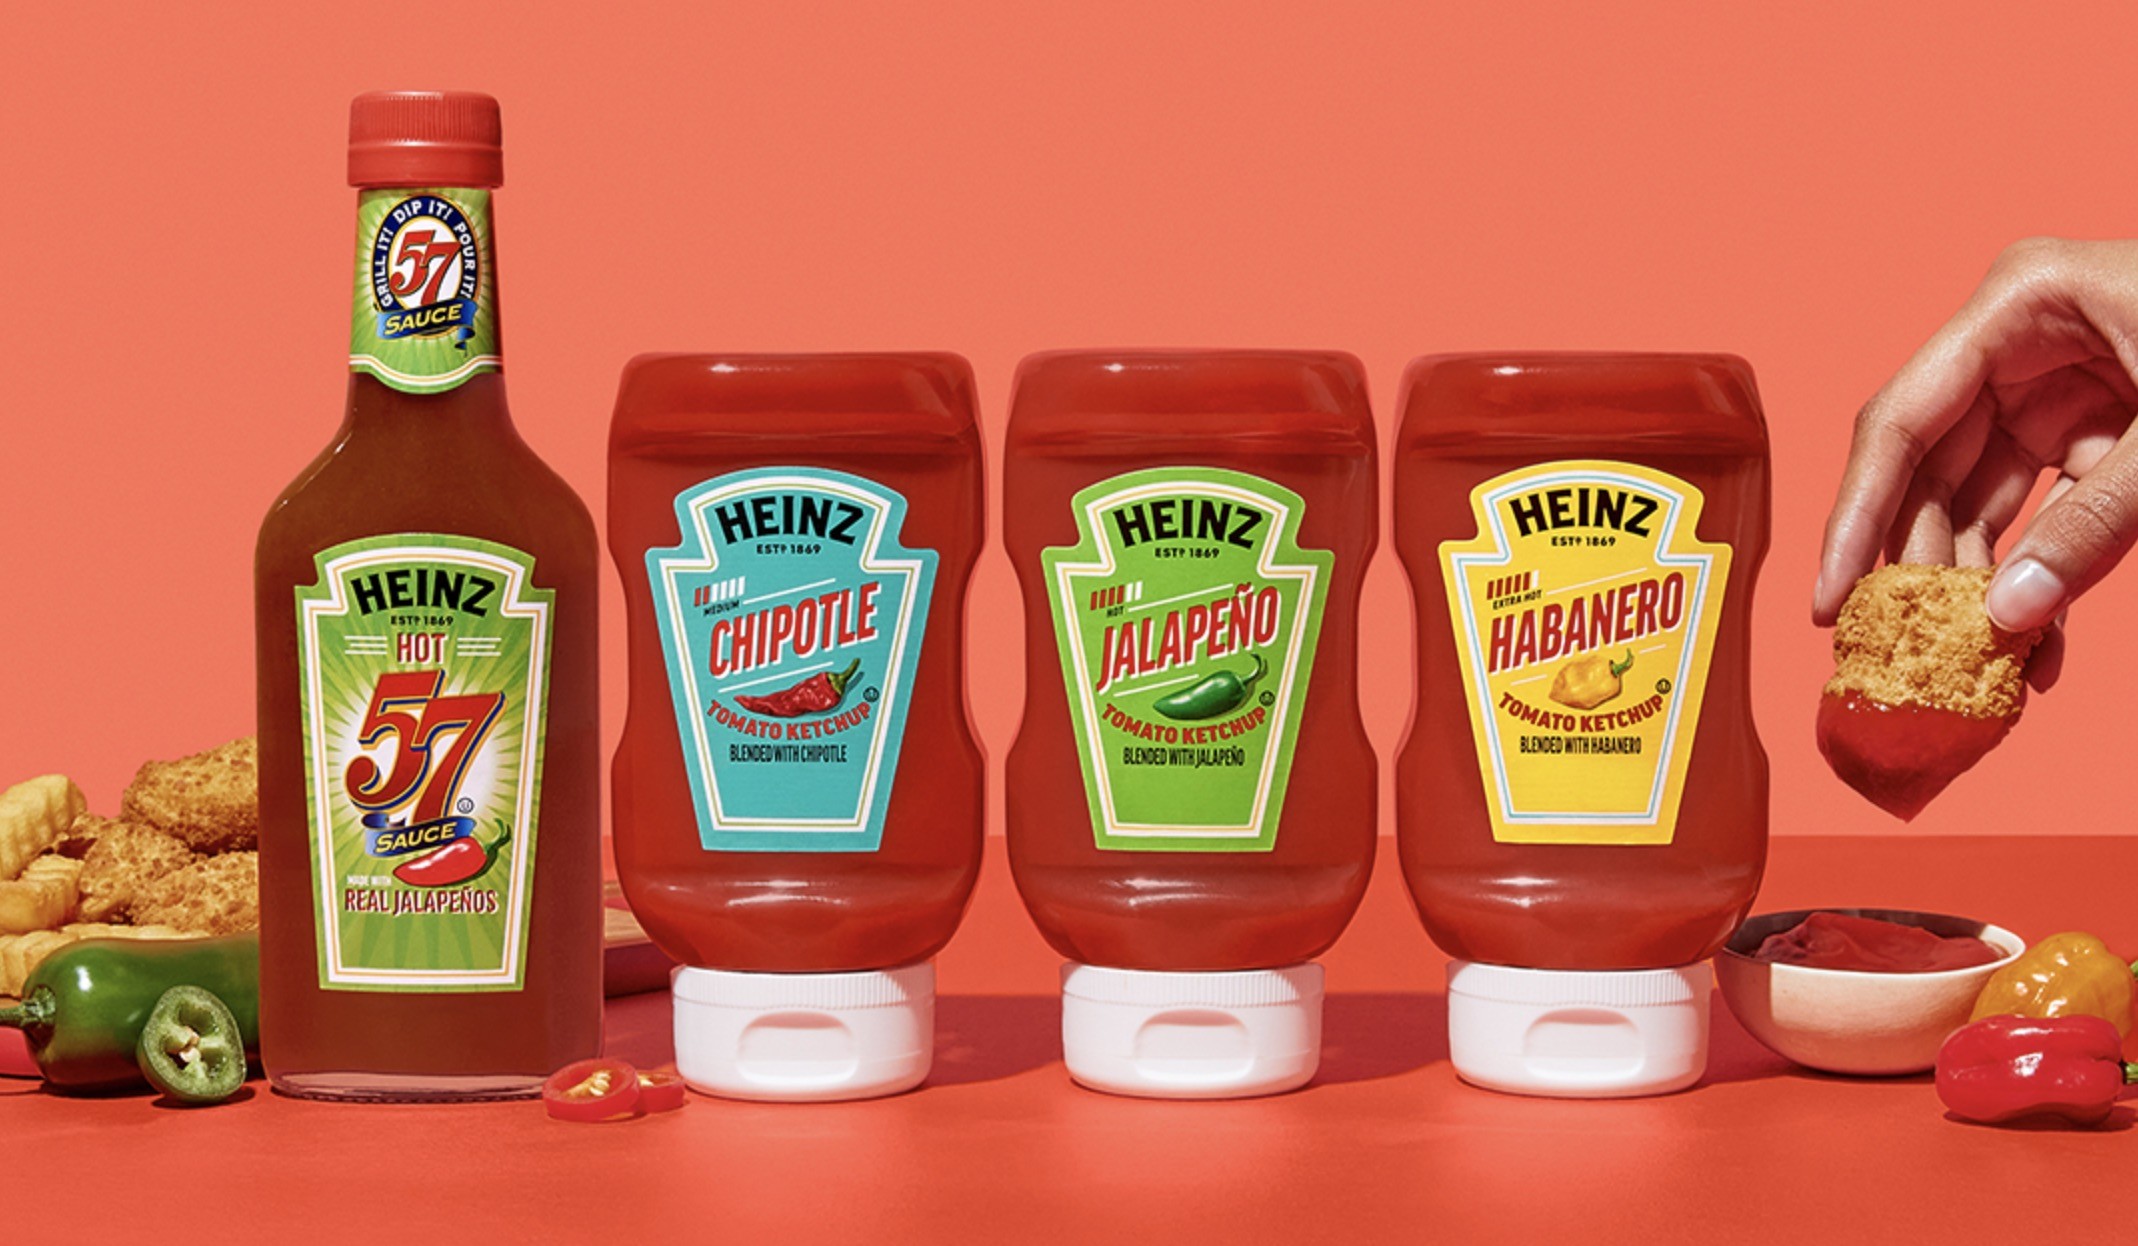 Whataburger to offer its line of spicy and specialty ketchup in Wal-Mart  stores 